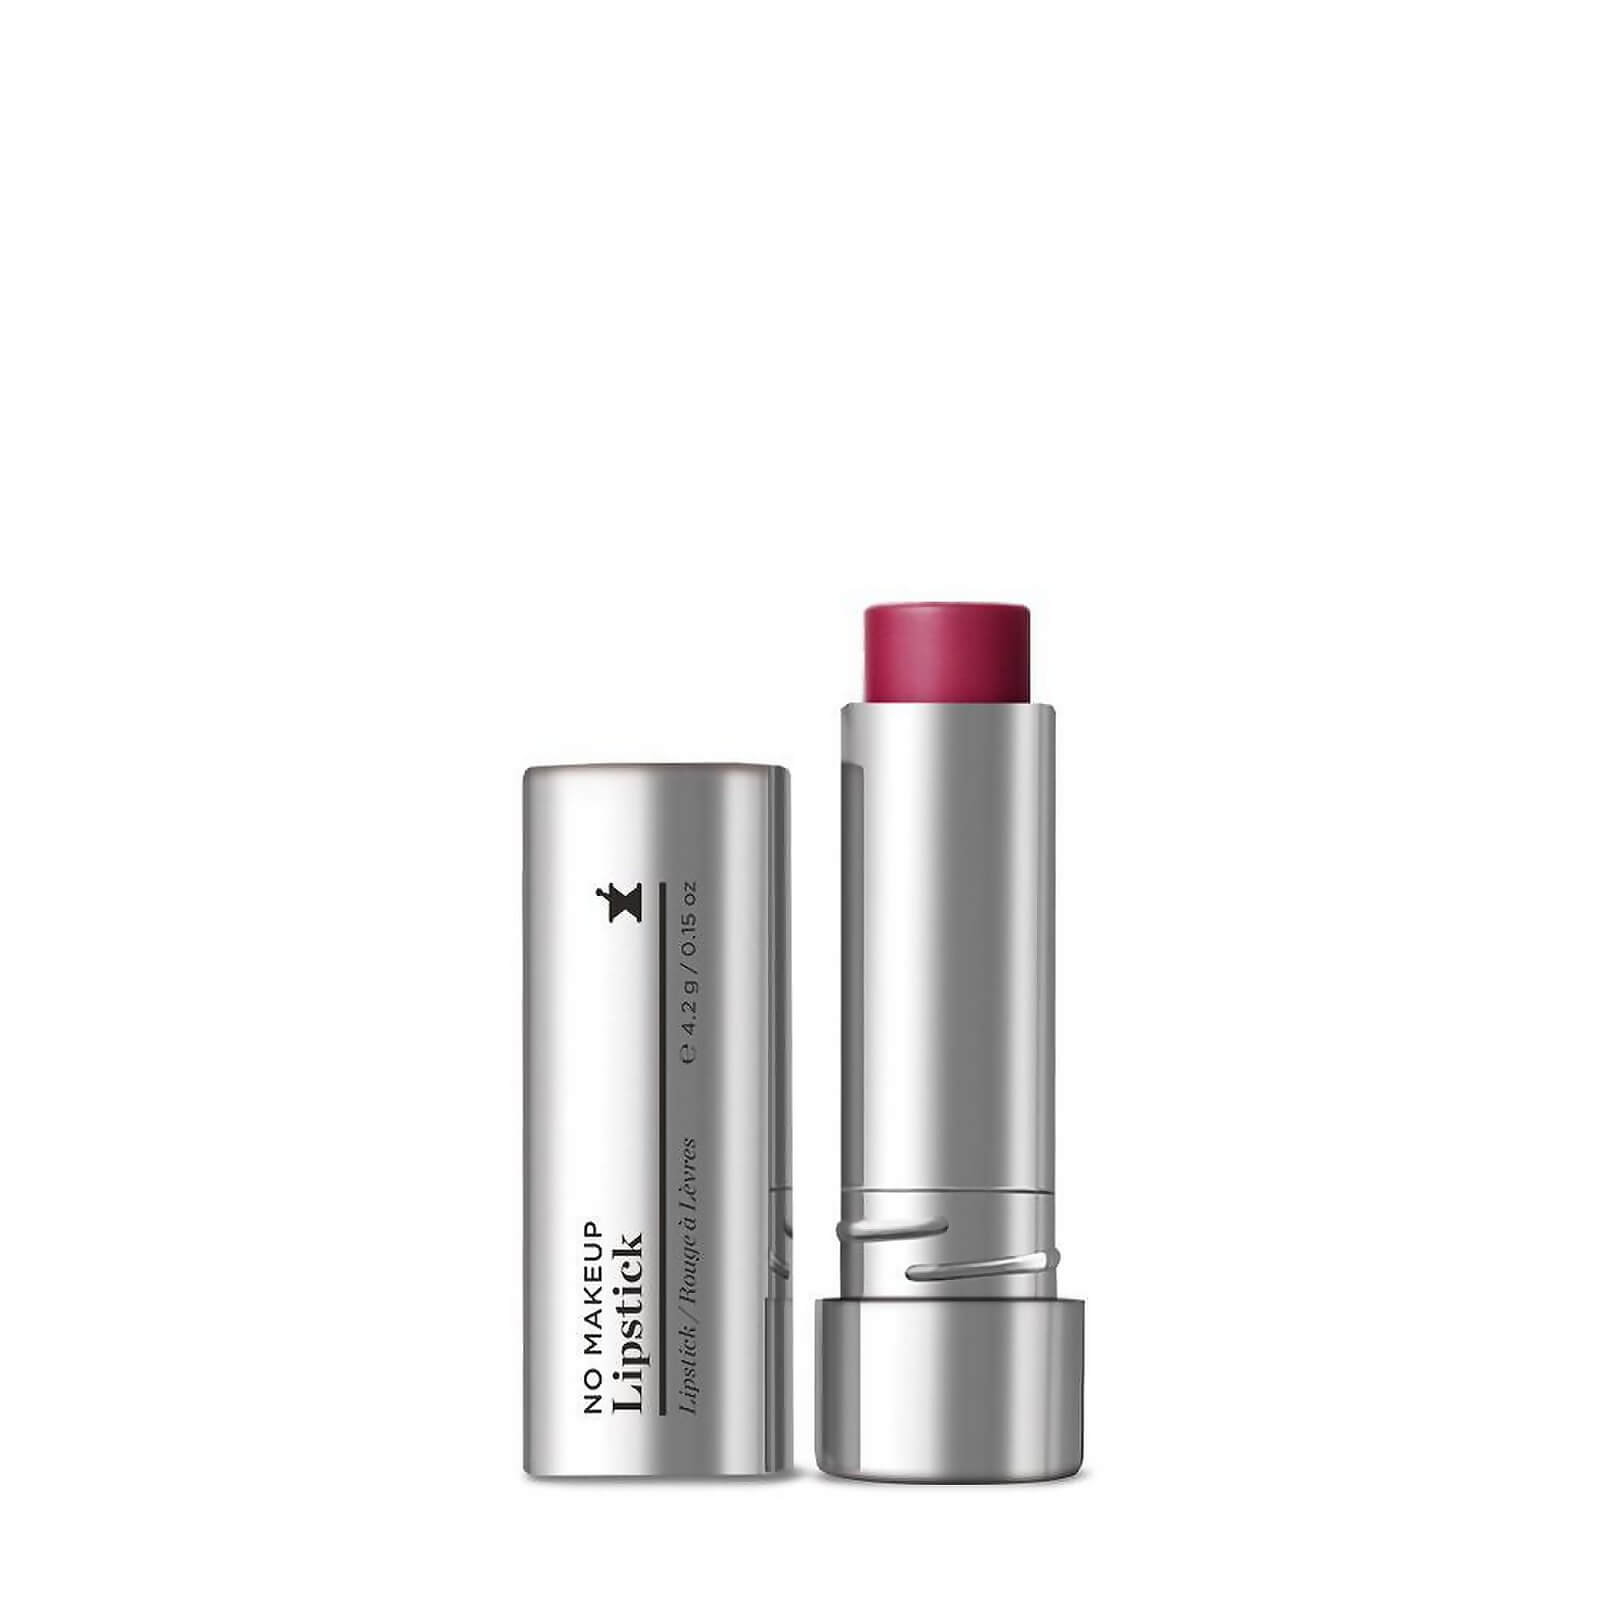 Image of Perricone MD No Makeup Lipstick SPF 15 4.2g (Various Shades) - 4 Red